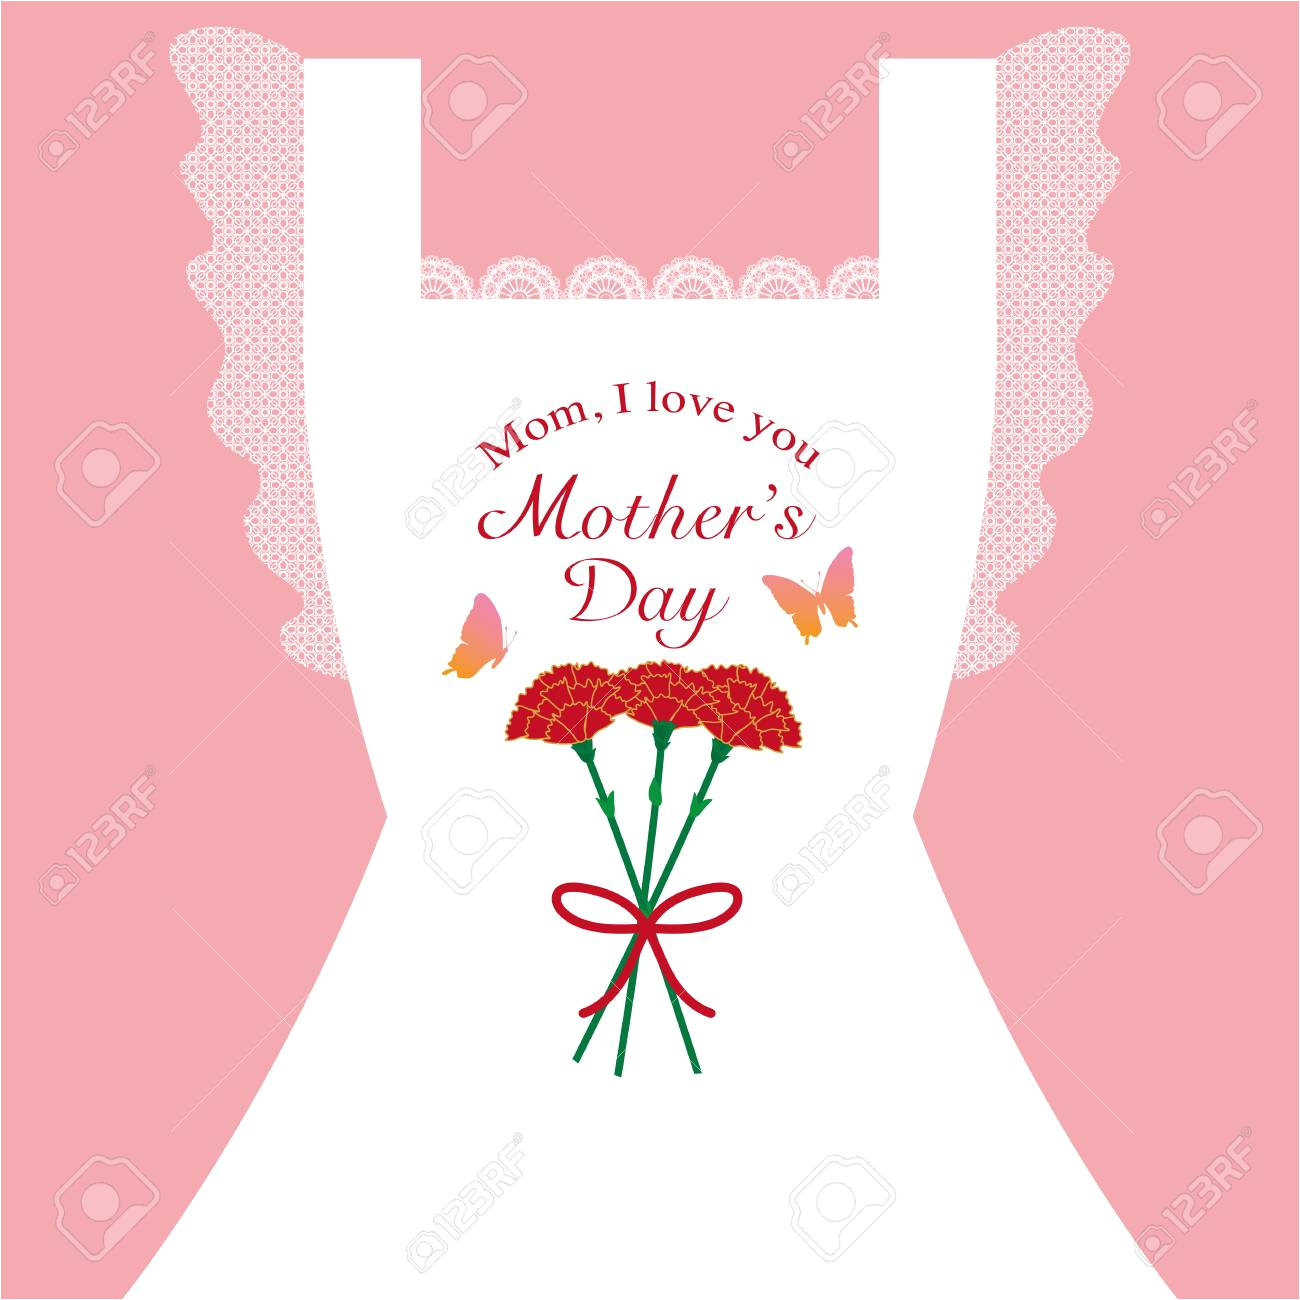 74880955 mother s day cute greeting card with apron jpg